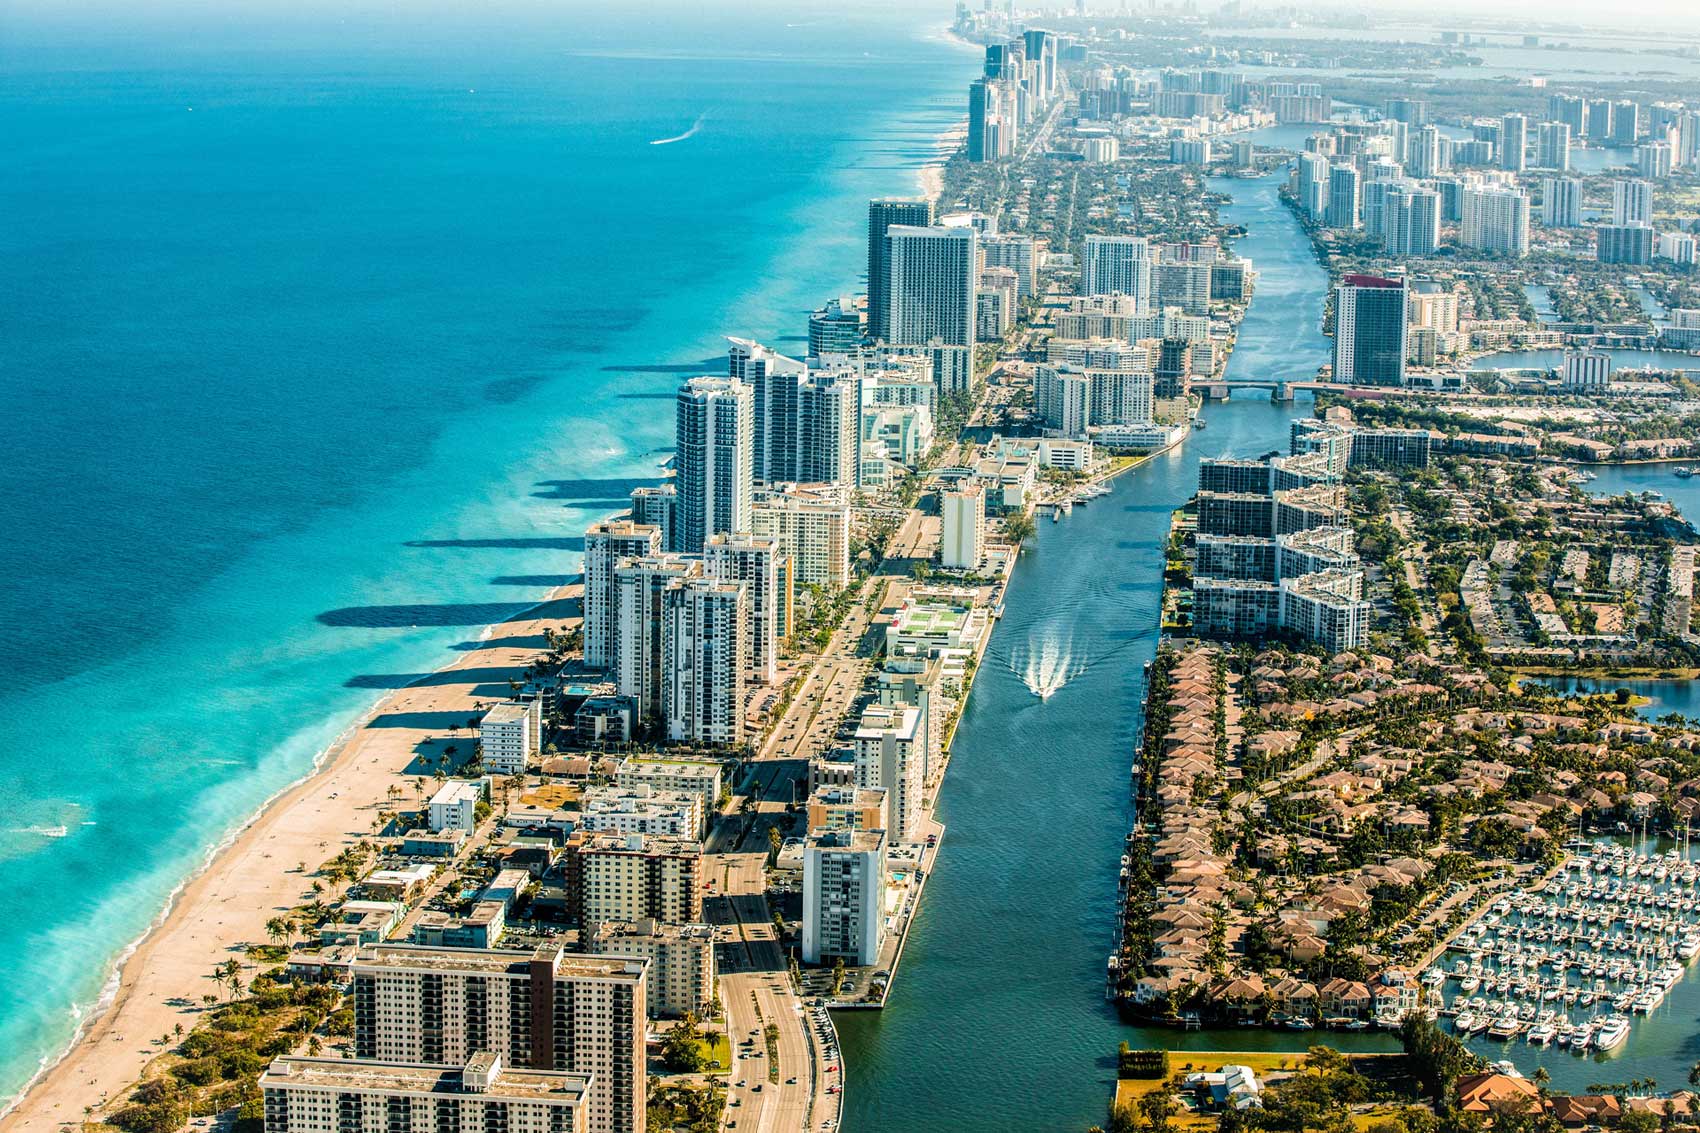 aerial view of florida beach and river lined by apartment buildings